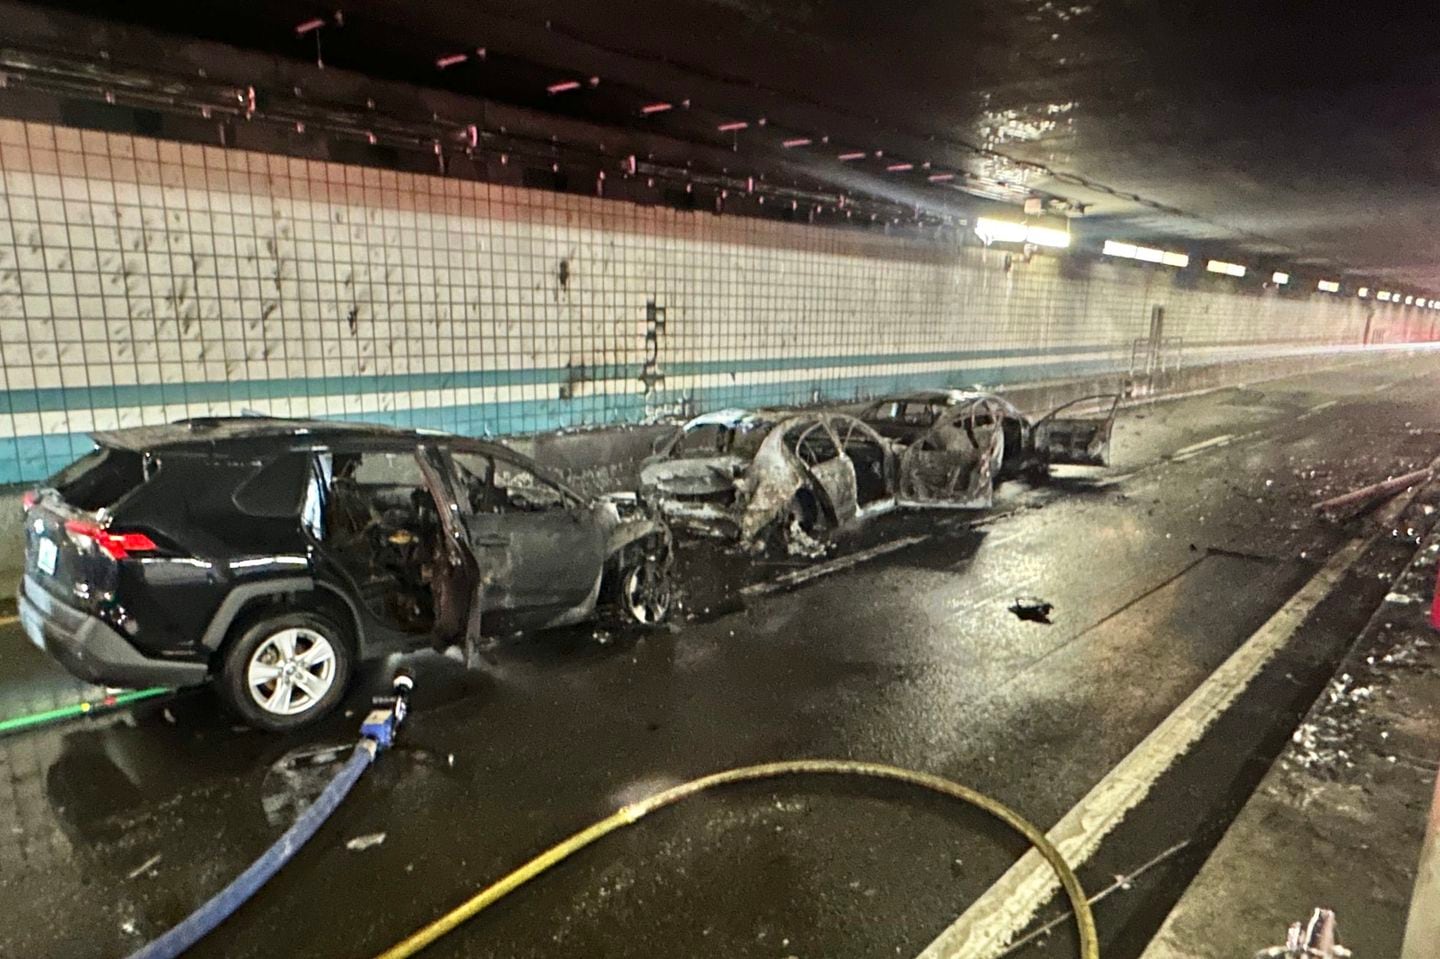 Boston firefighters were able to quickly extinguish the fire in two vehicles. A third fire took longer because it was a hybrid vehicle, the department said on X.